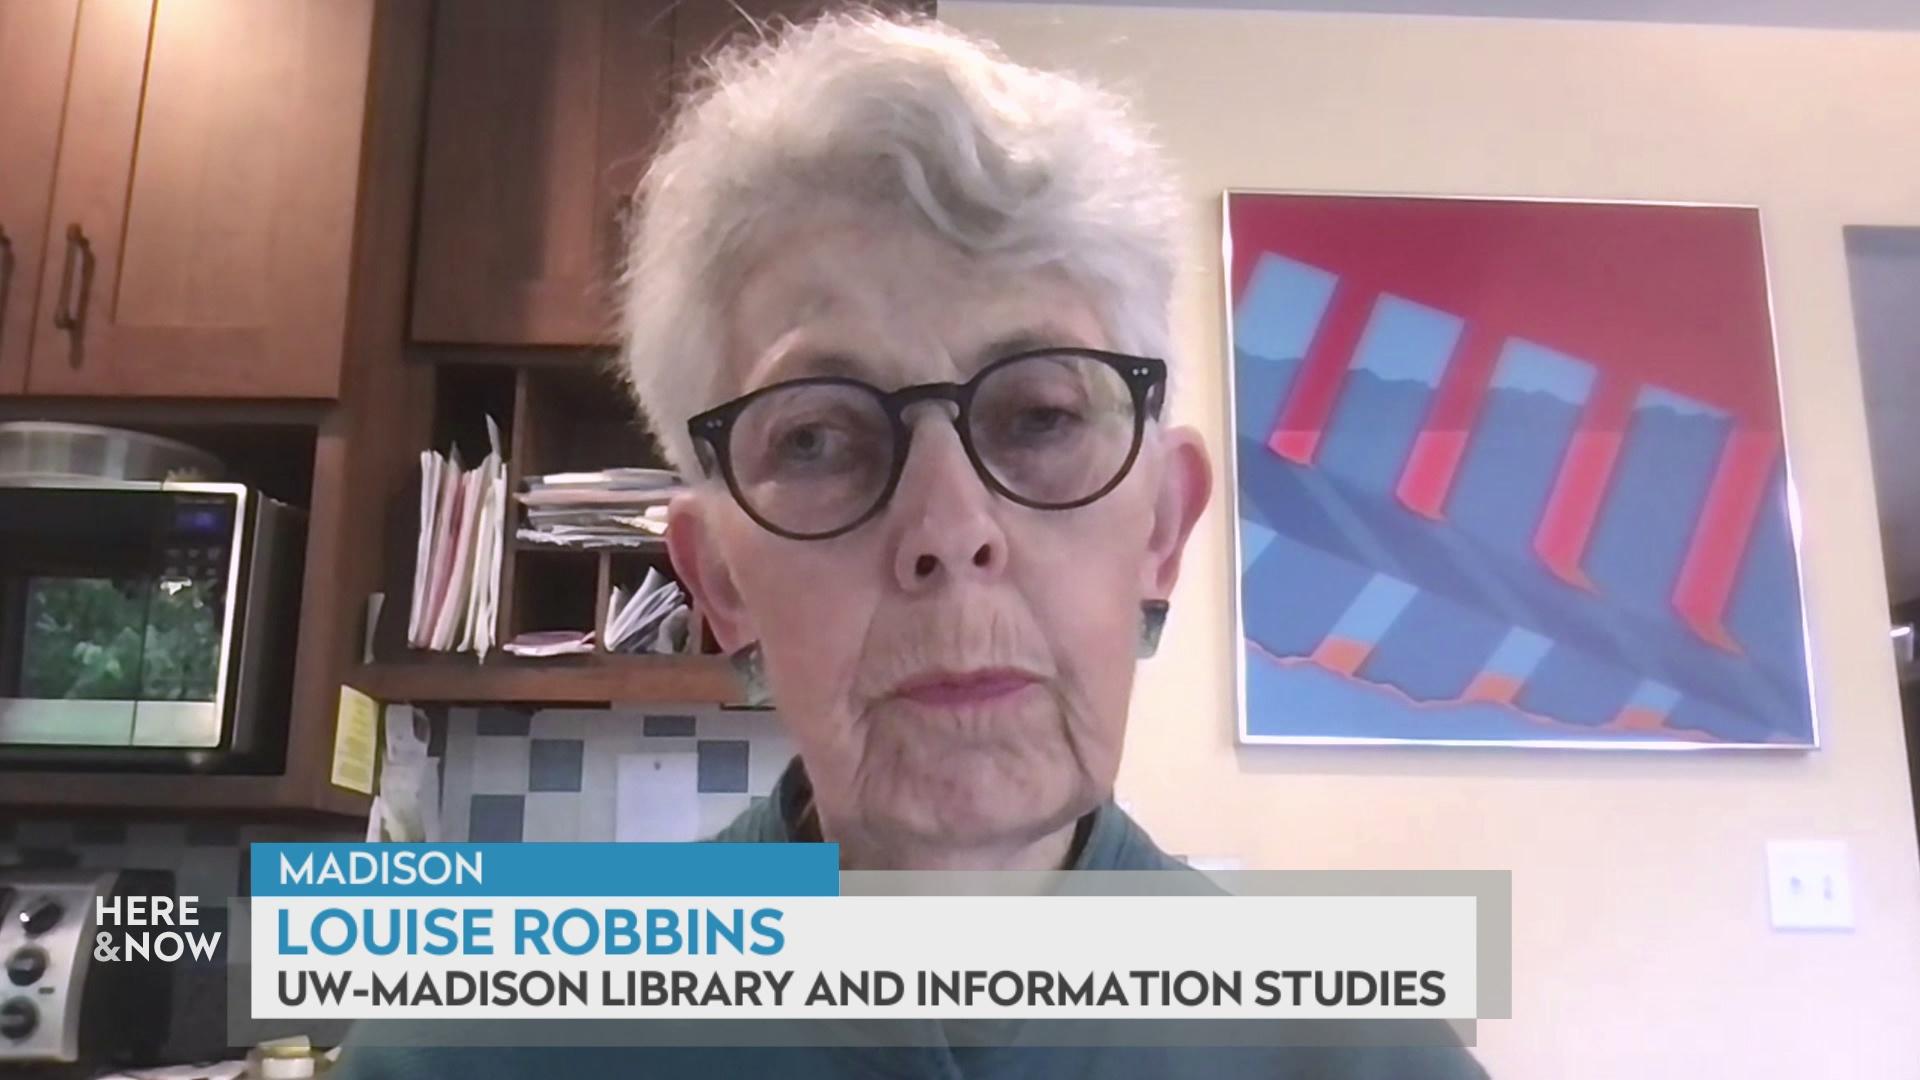 A still image from a video shows Louise Robbins seated in front of wooden cabinets with papers and a framed red and blue art piece with a graphic at bottom reading 'Madison,' 'Louise Robbins' and 'UW-Madison Library and Information Studies.'